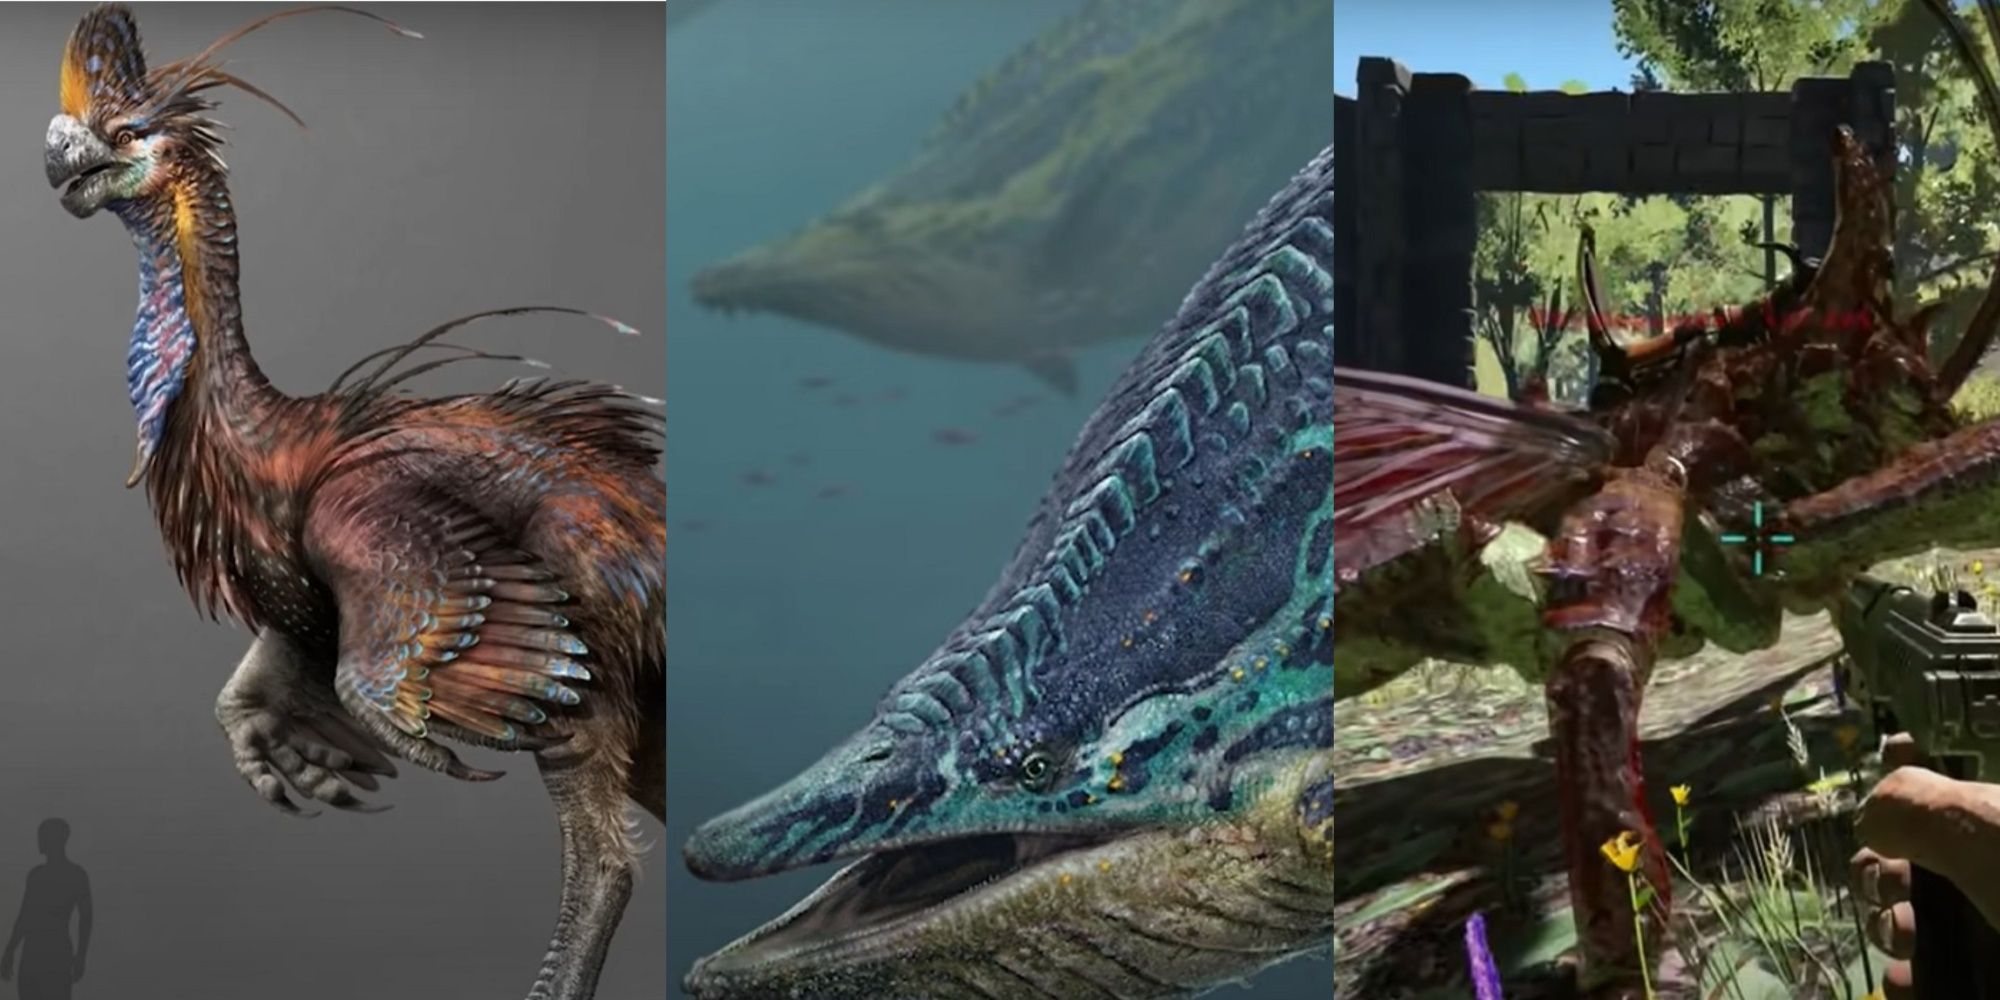 Ark Survival Ascended triple image showing creatures from the game